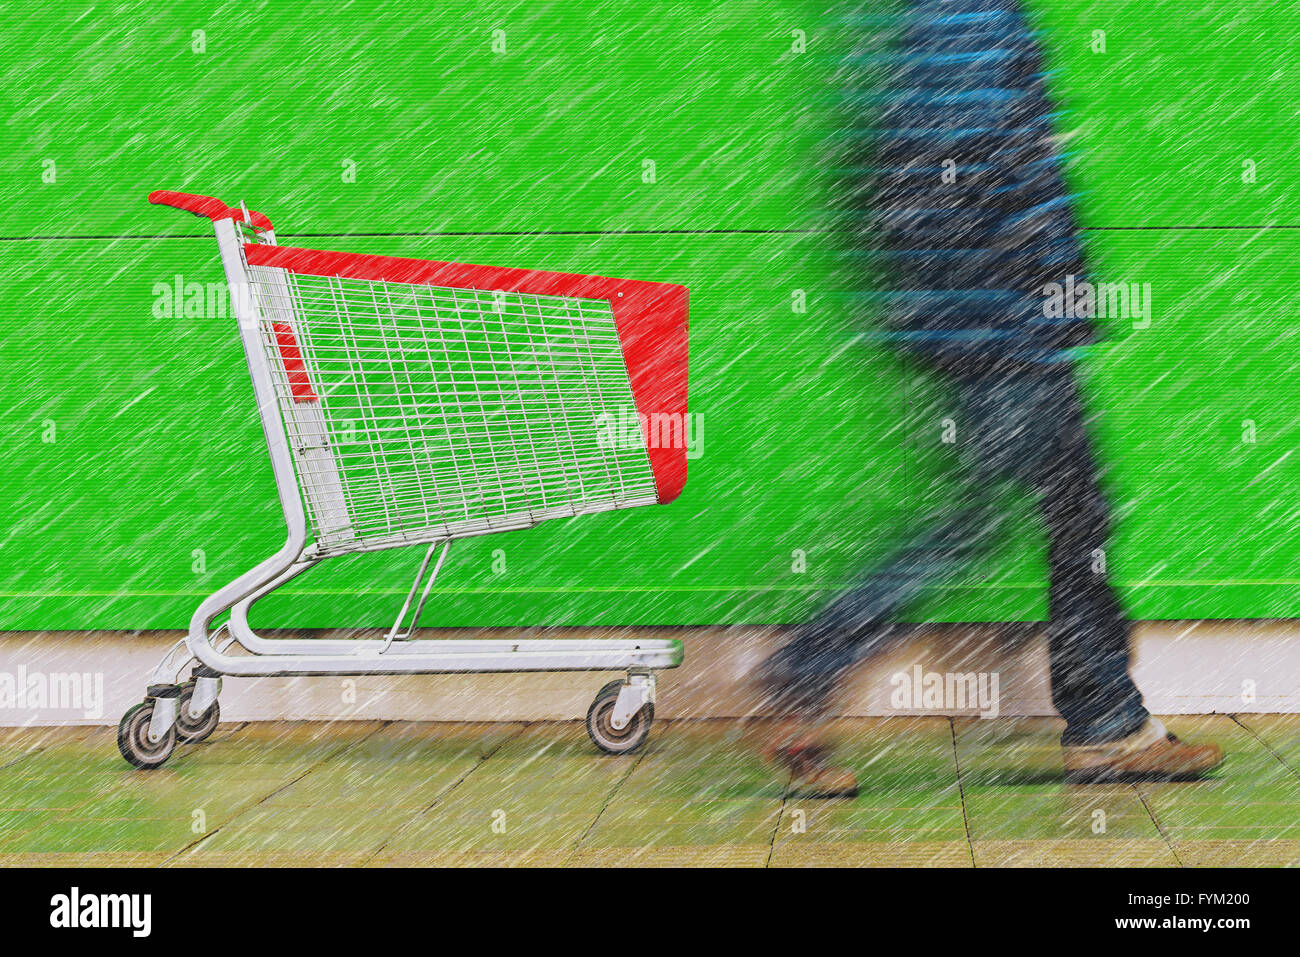 Shopping on a rainy day, motion blur man walking by empty cart trolley in front of a supermarket. Stock Photo